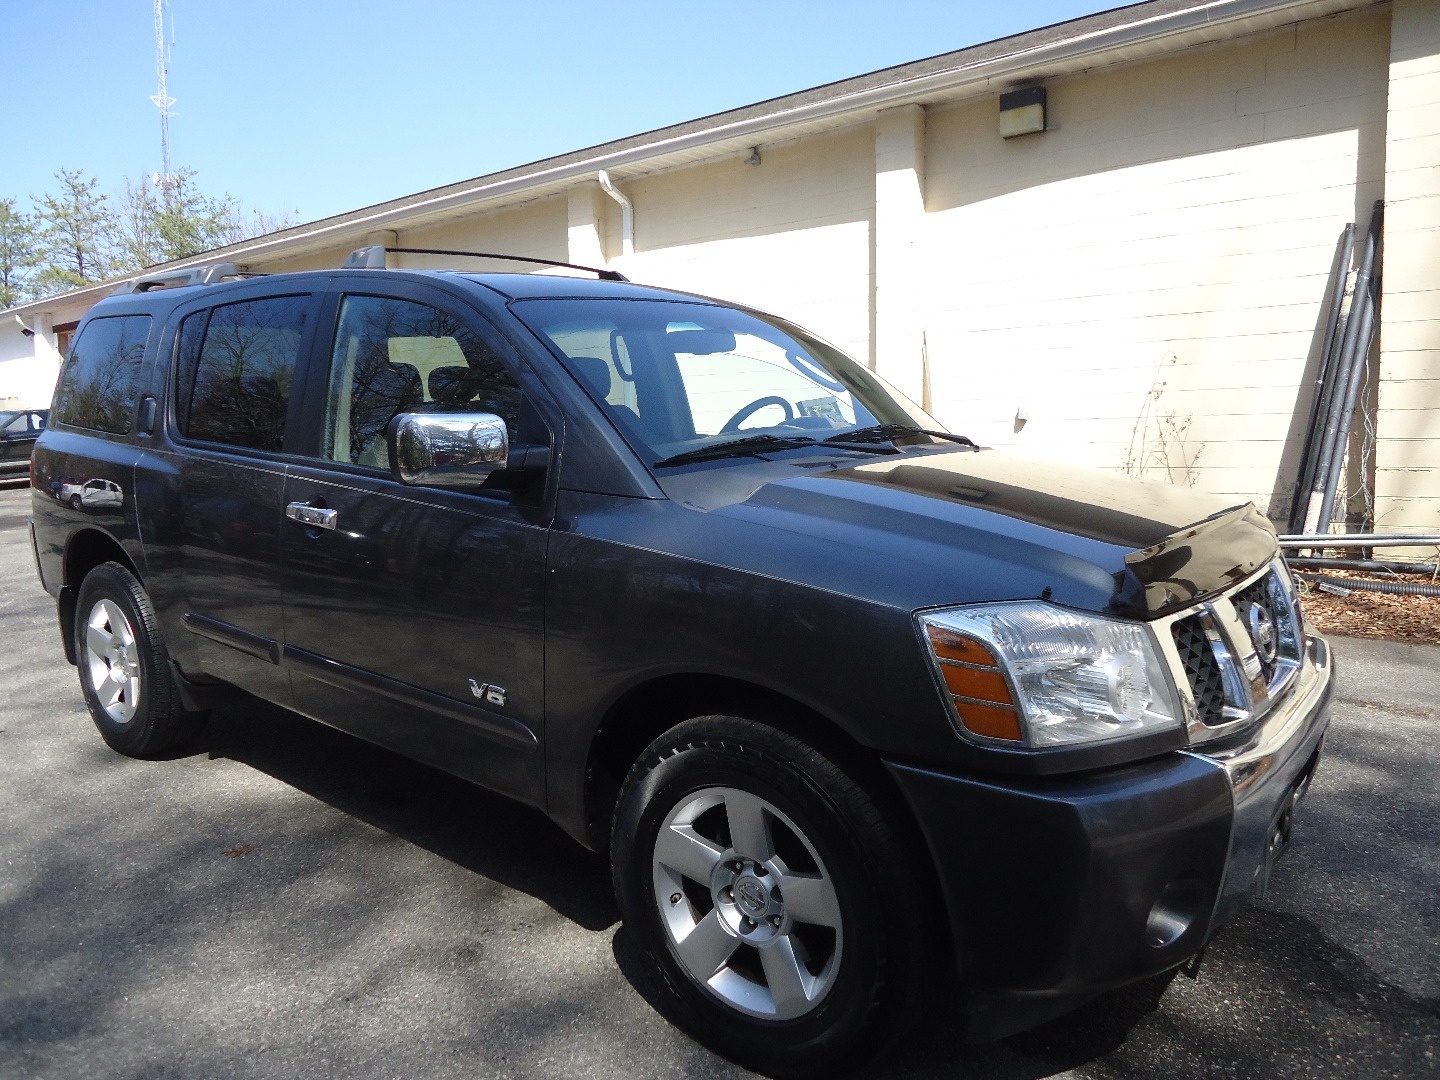 Finding a used 2007 nissan armada #1